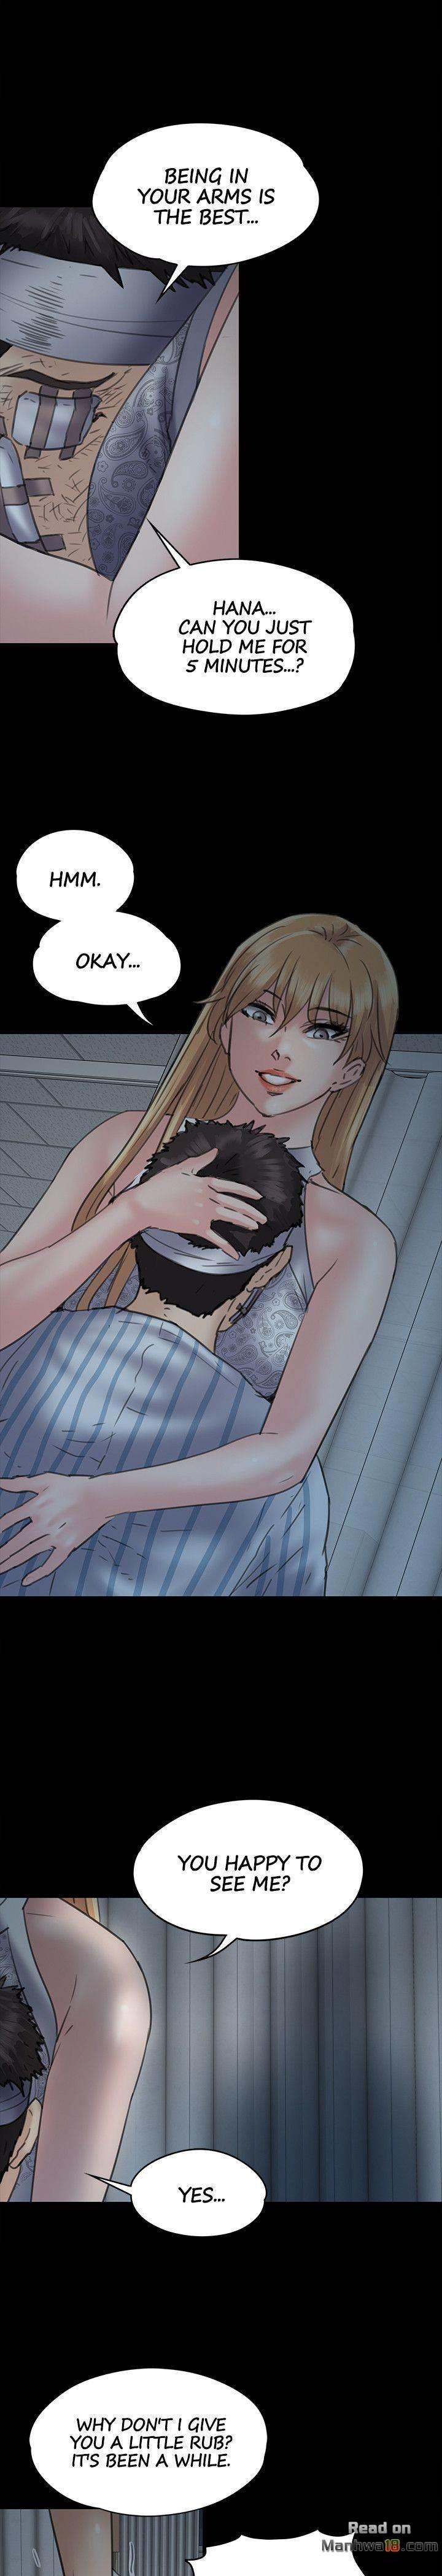 Panel Image 1 for chapter 49 of manhwa Queen Bee on read.oppai.stream